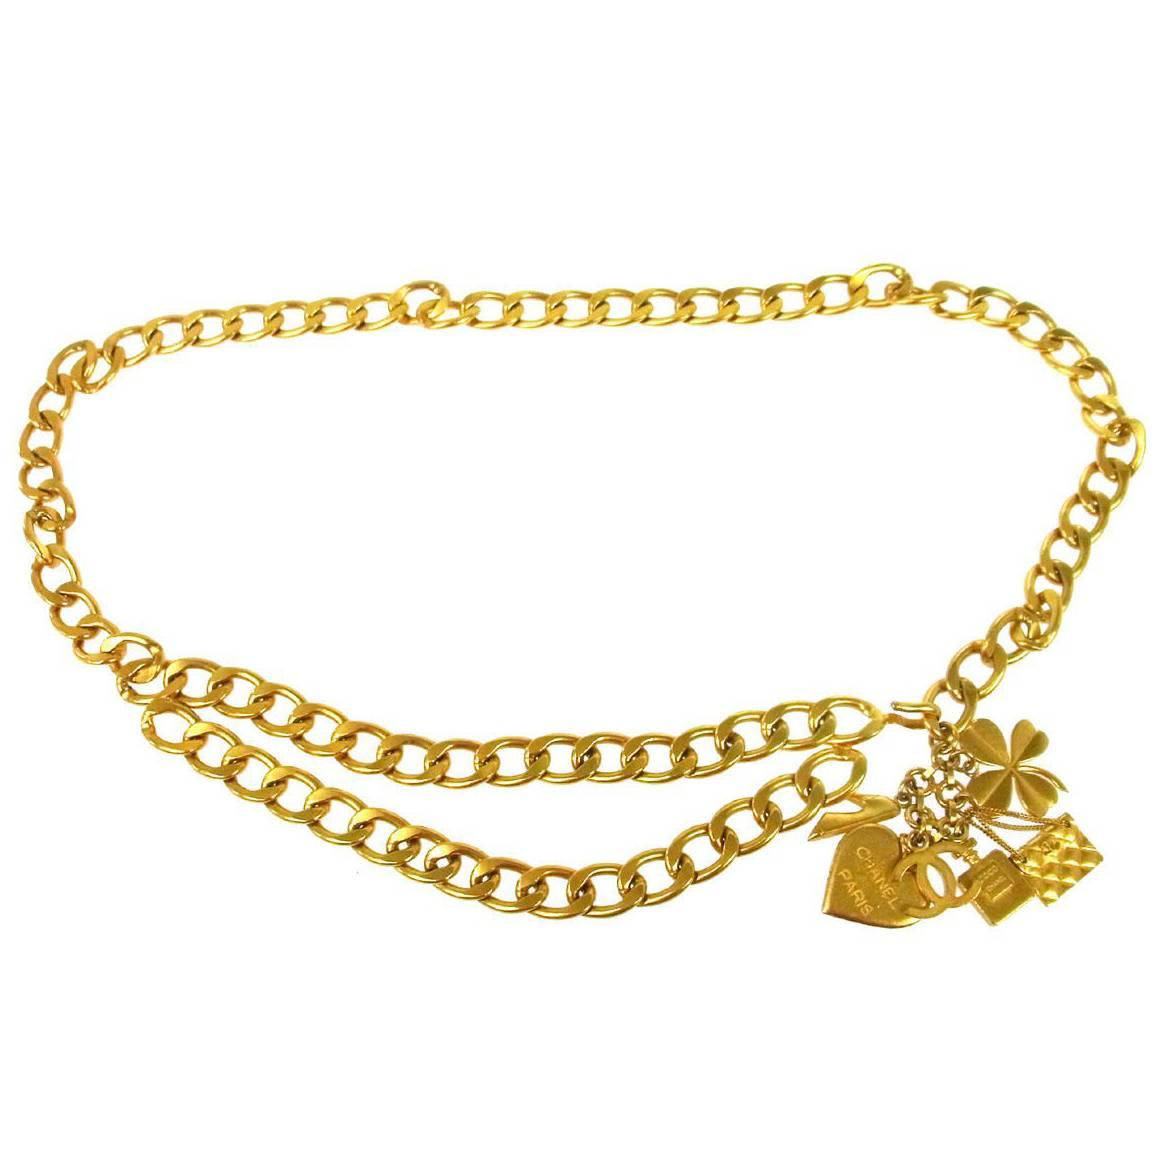 Chanel Gold Favorite Things Charm Statement Evening Chain Link Waist Belt 